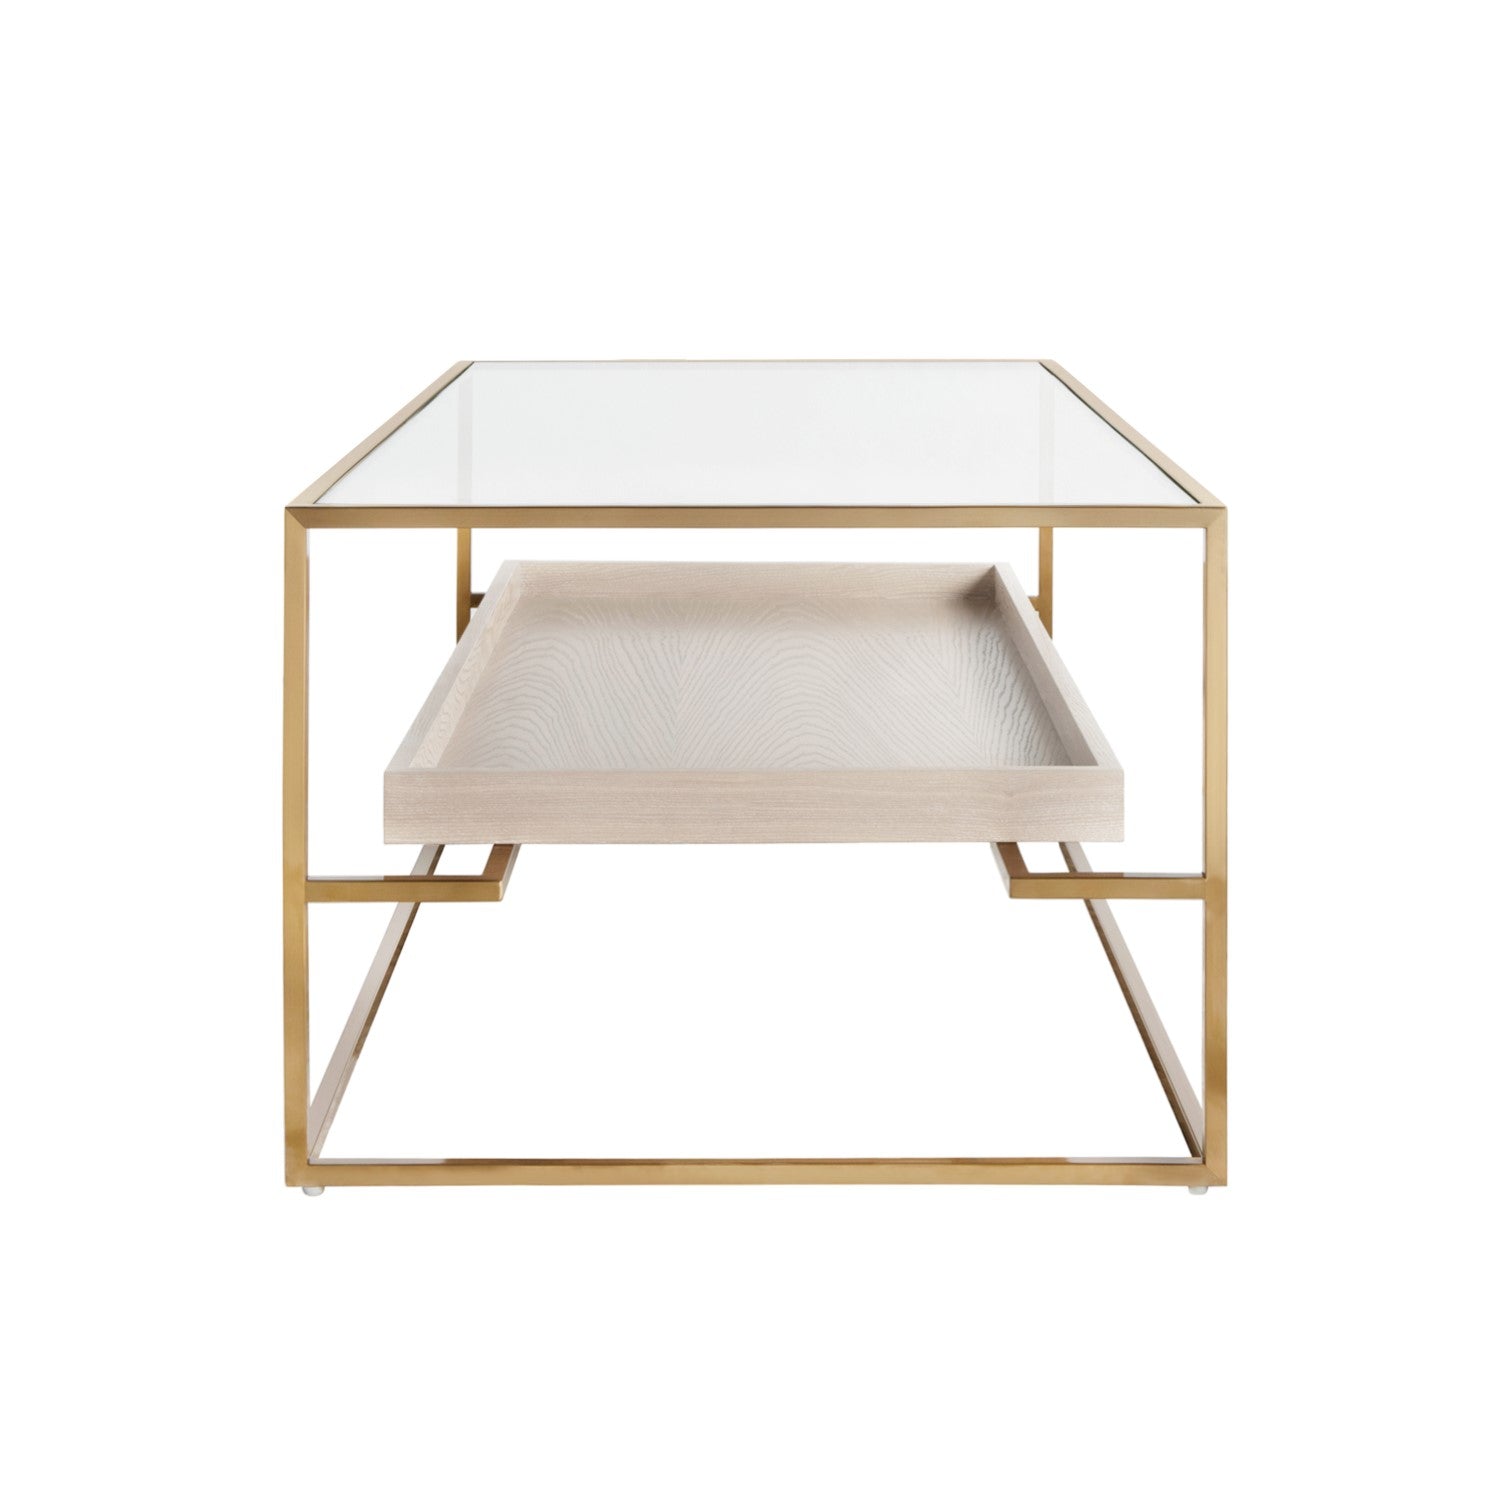 Shop Glass Top Coffee Table With Floating Shelf | Burke Decor